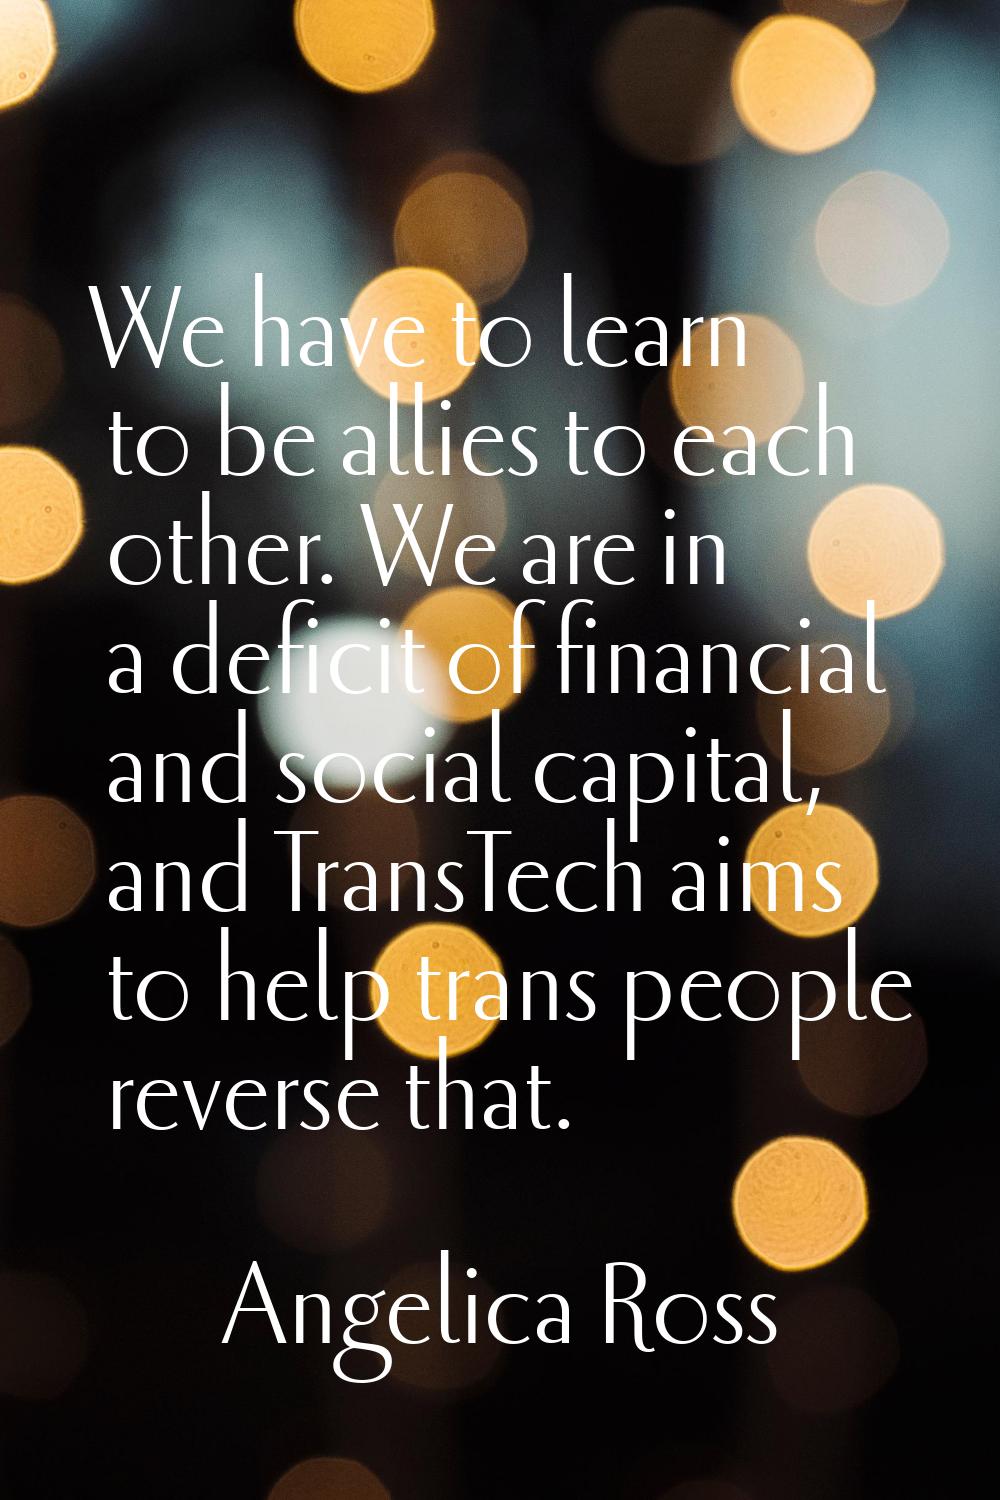 We have to learn to be allies to each other. We are in a deficit of financial and social capital, a